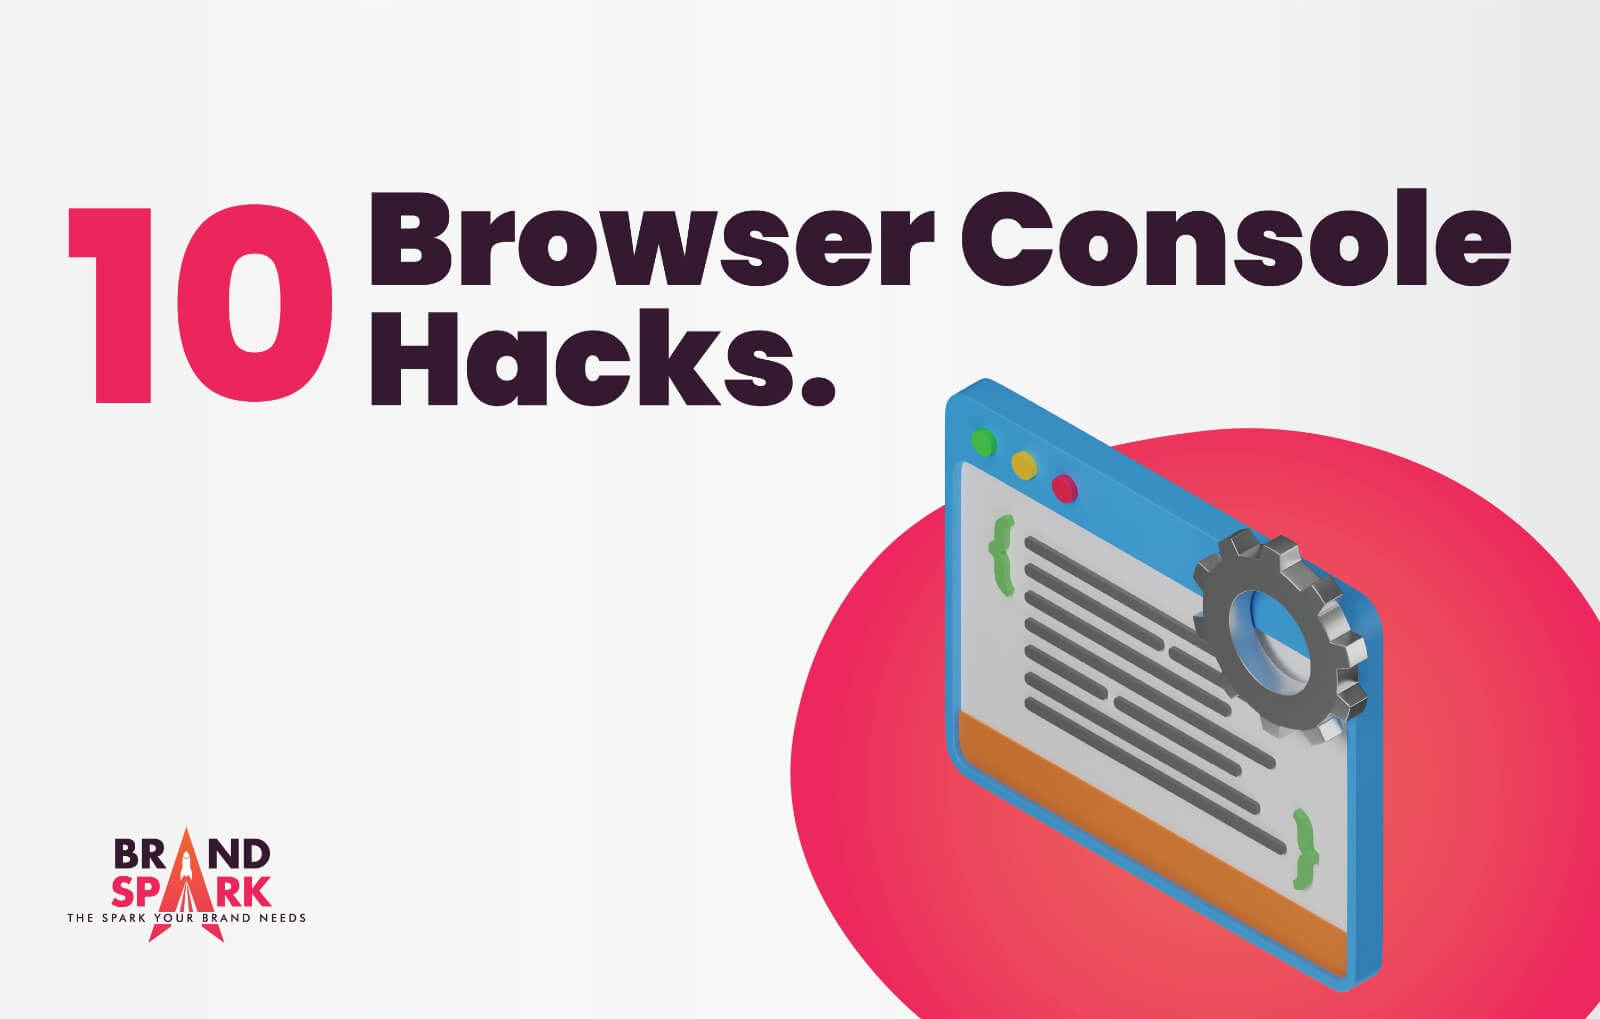 10 Browser Console Hacks: Unleashing the Power of Your Browser